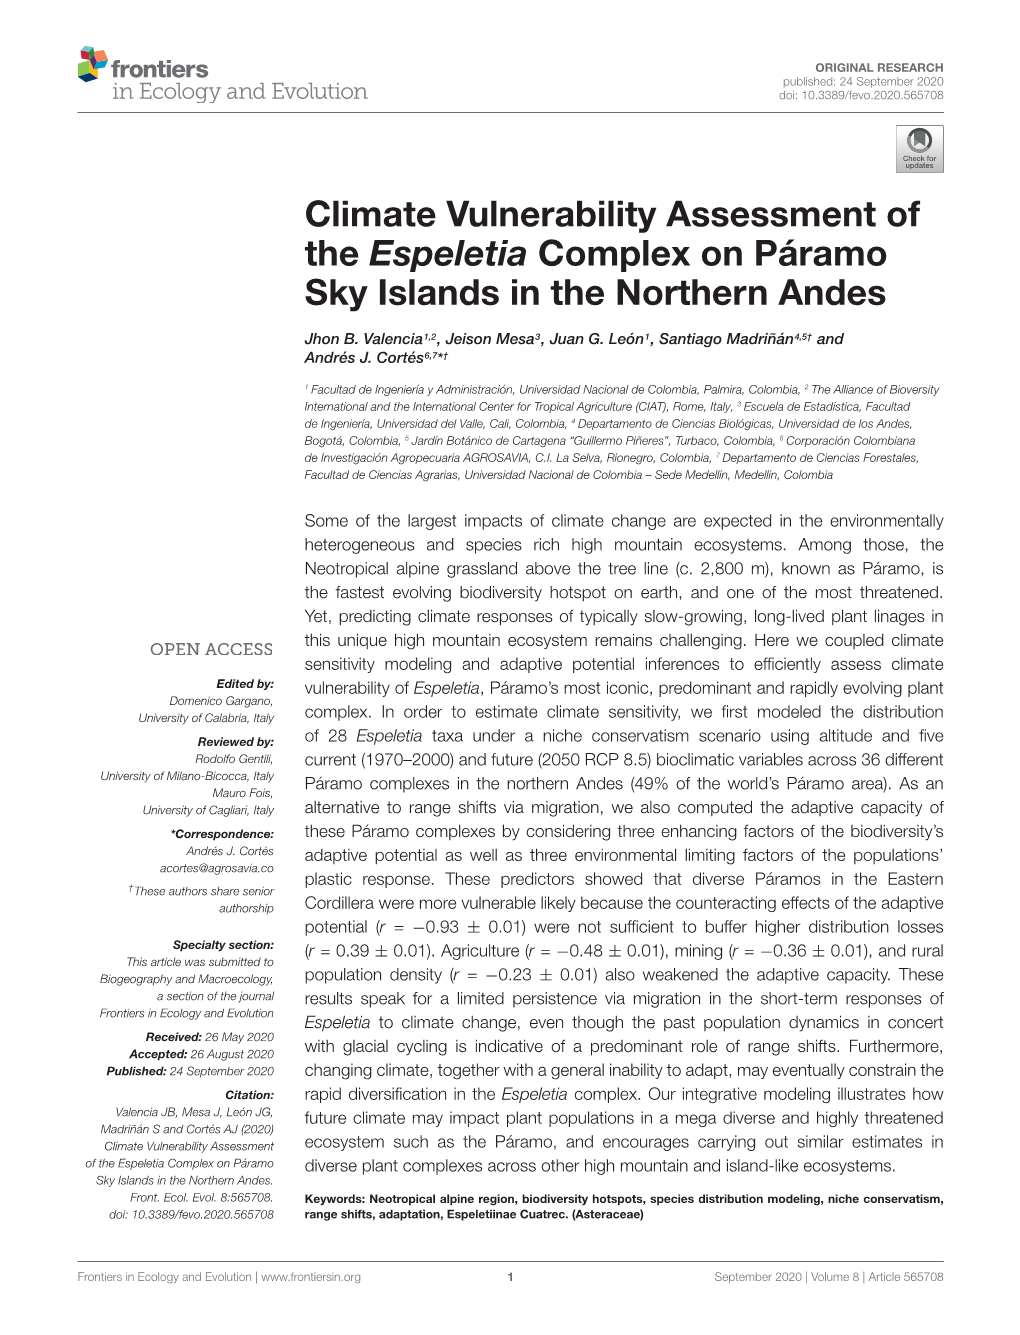 Climate Vulnerability Assessment of the Espeletia Complex on Páramo Sky Islands in the Northern Andes